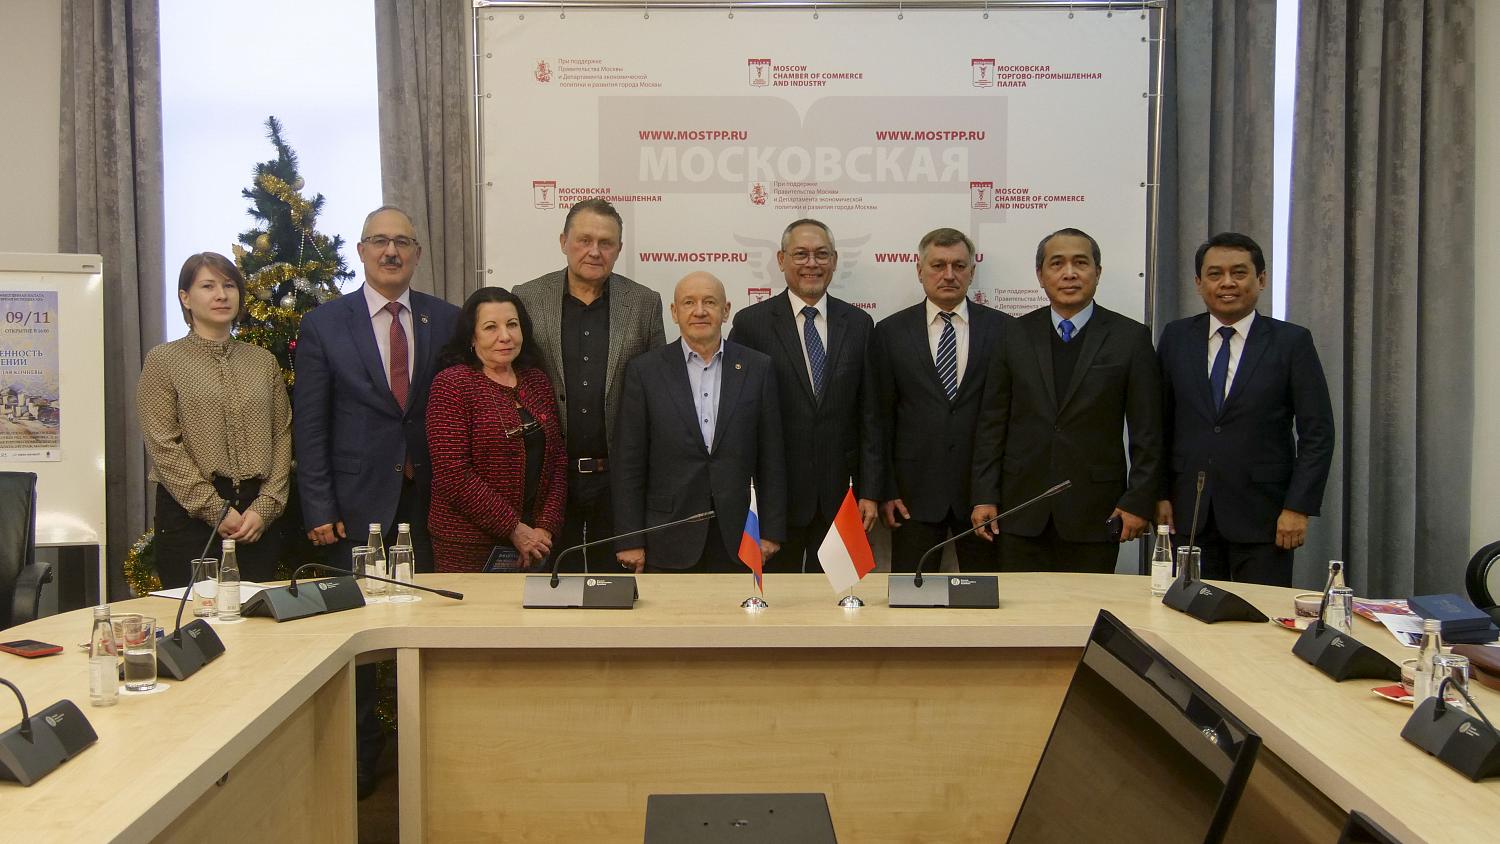 Distinguished guests from Indonesia visited the Moscow Chamber of Commerce and Industry